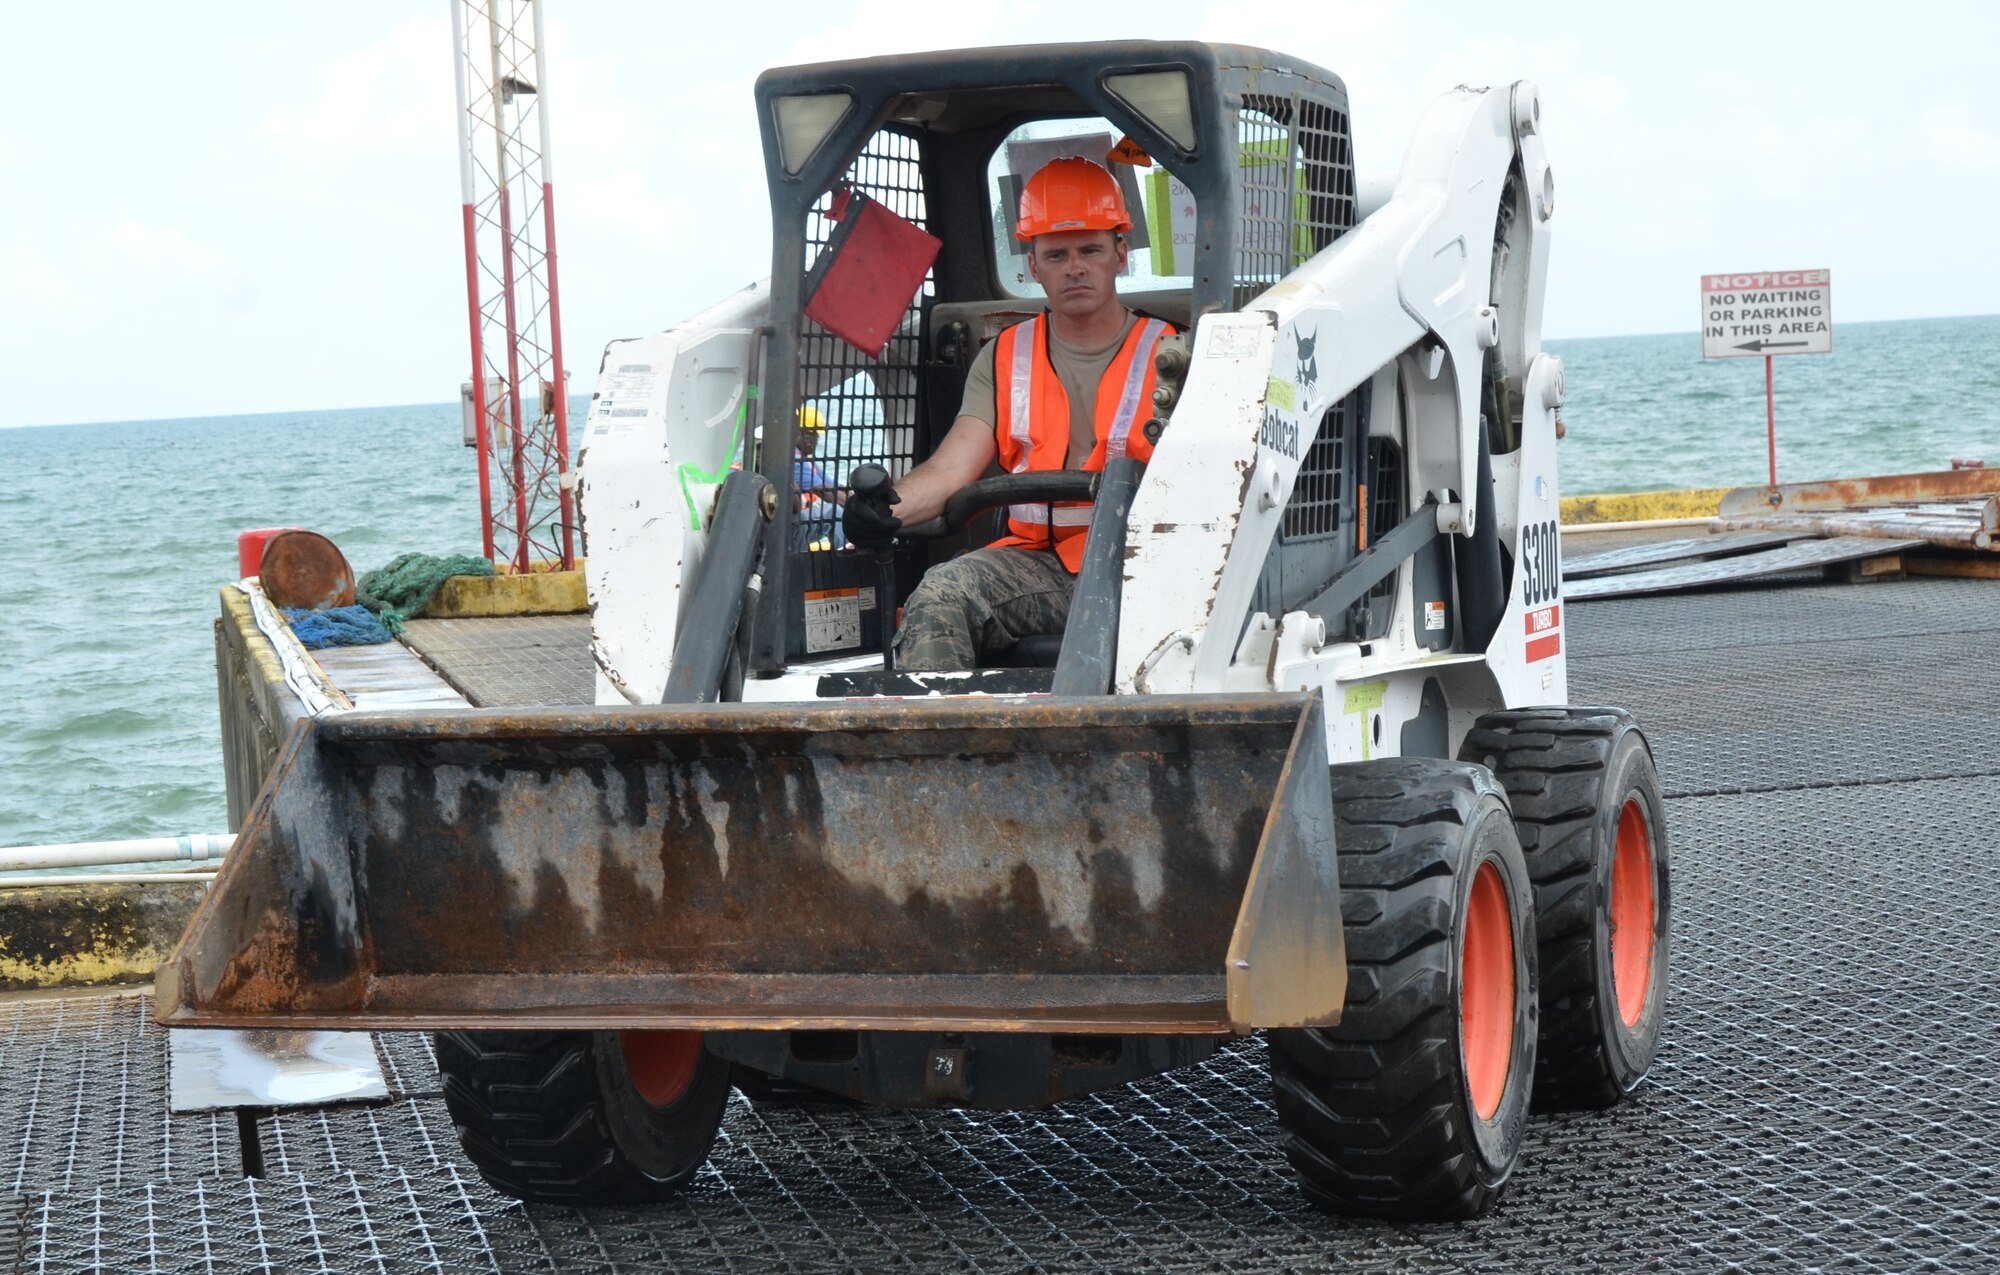 Tech. Sgt. Lance Beaver, New Horizons air transportation craftsman, drives a Bobcat off of the barge and onto the pier March 8. (U.S. Air Force photo by Master Sgt. Kelly Ogden/Released)